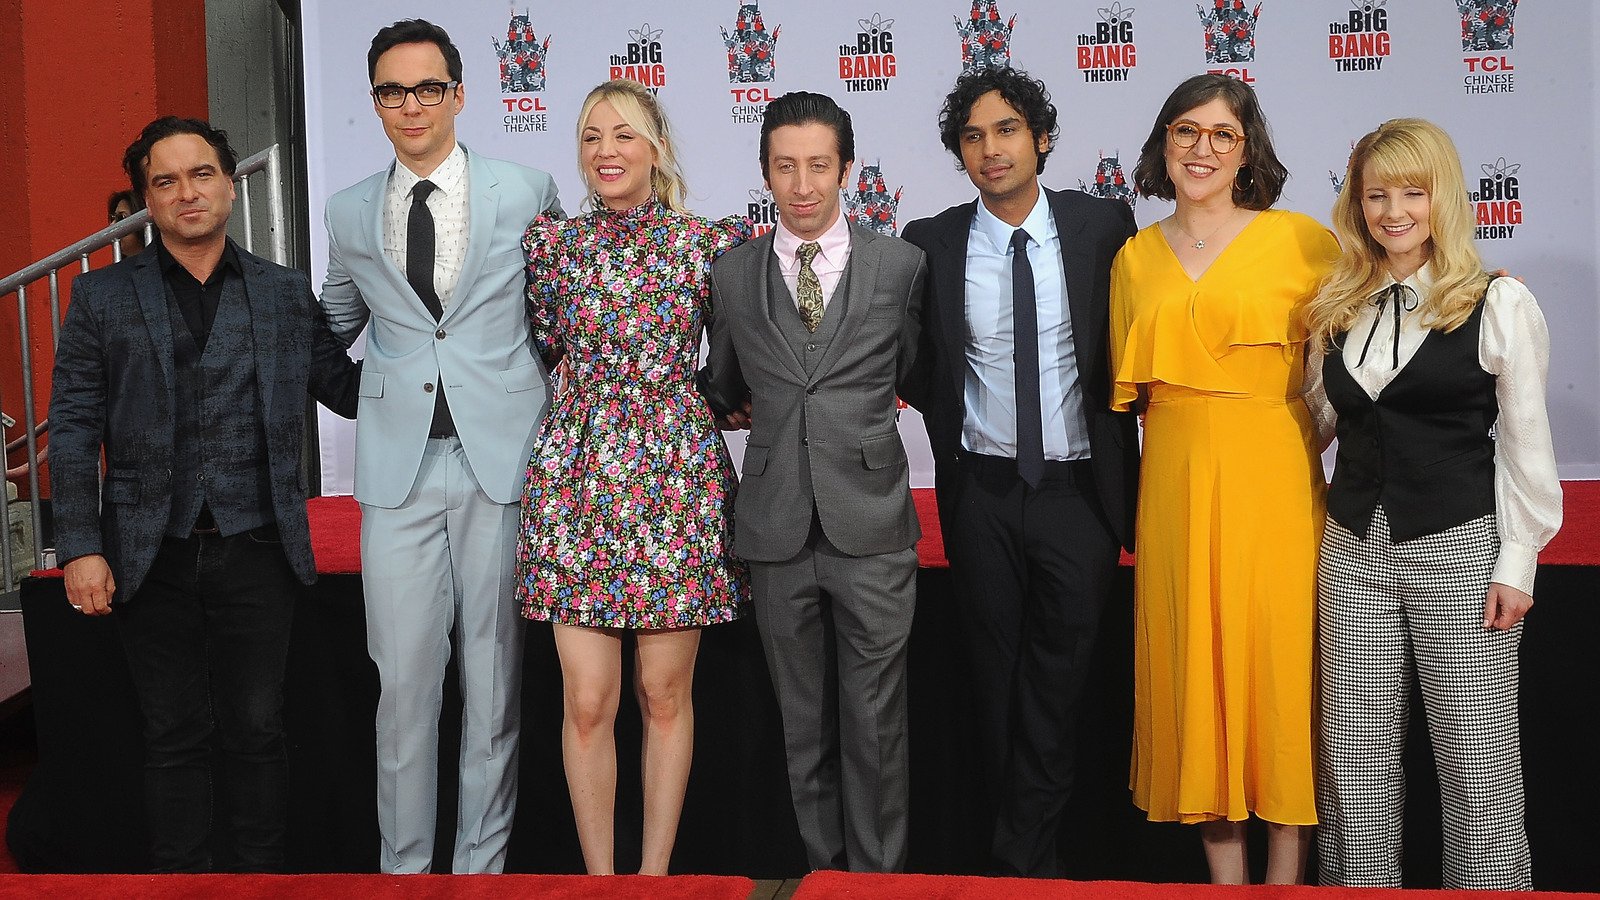 The Secret Big Bang Theory Wedding We Didn't Get To See - The List